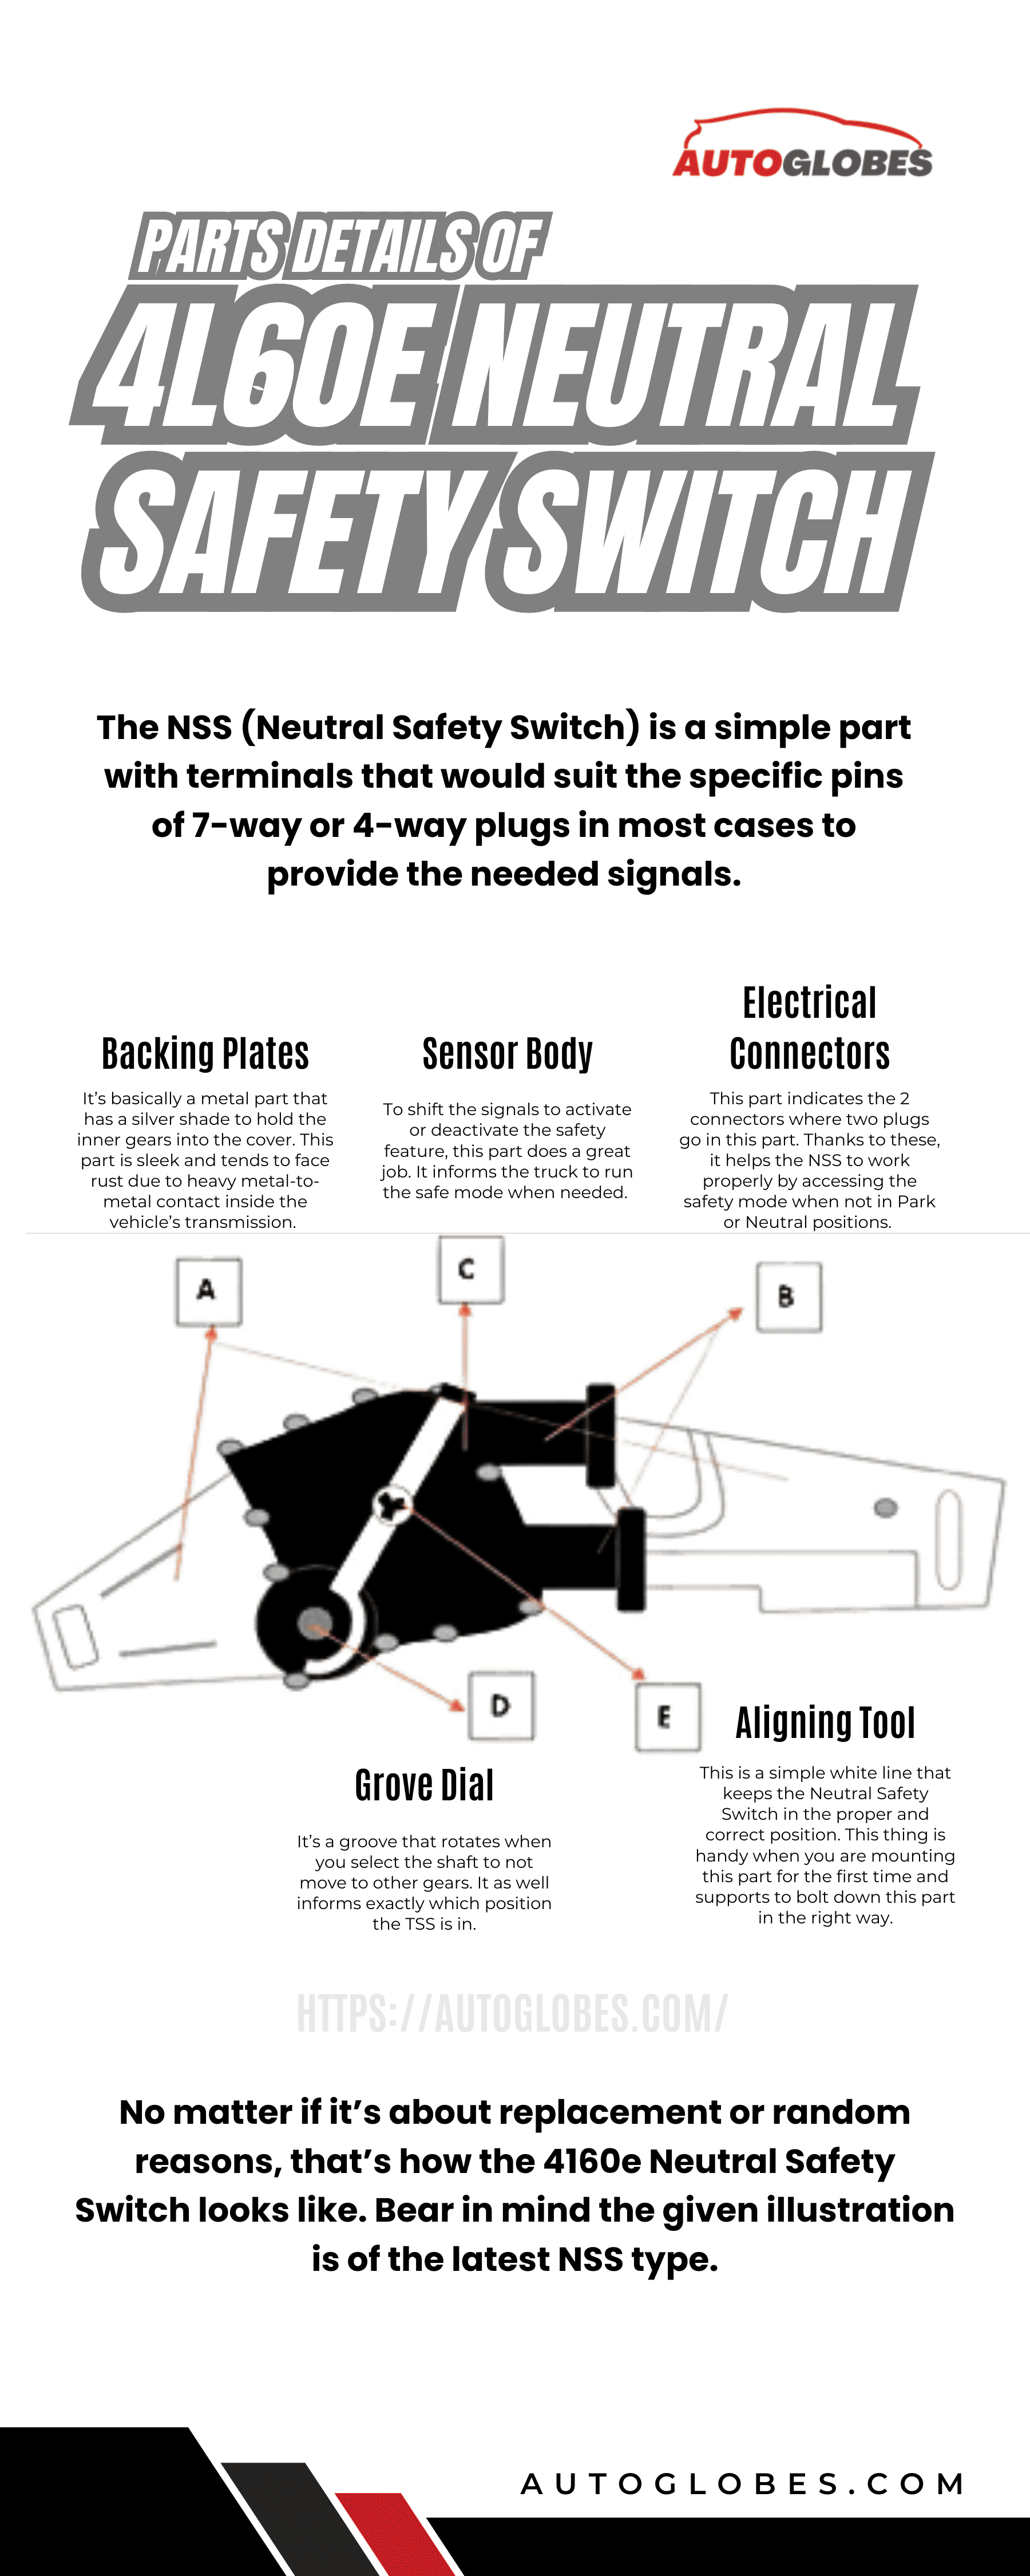 4l60e Neutral Safety Switch Infographic